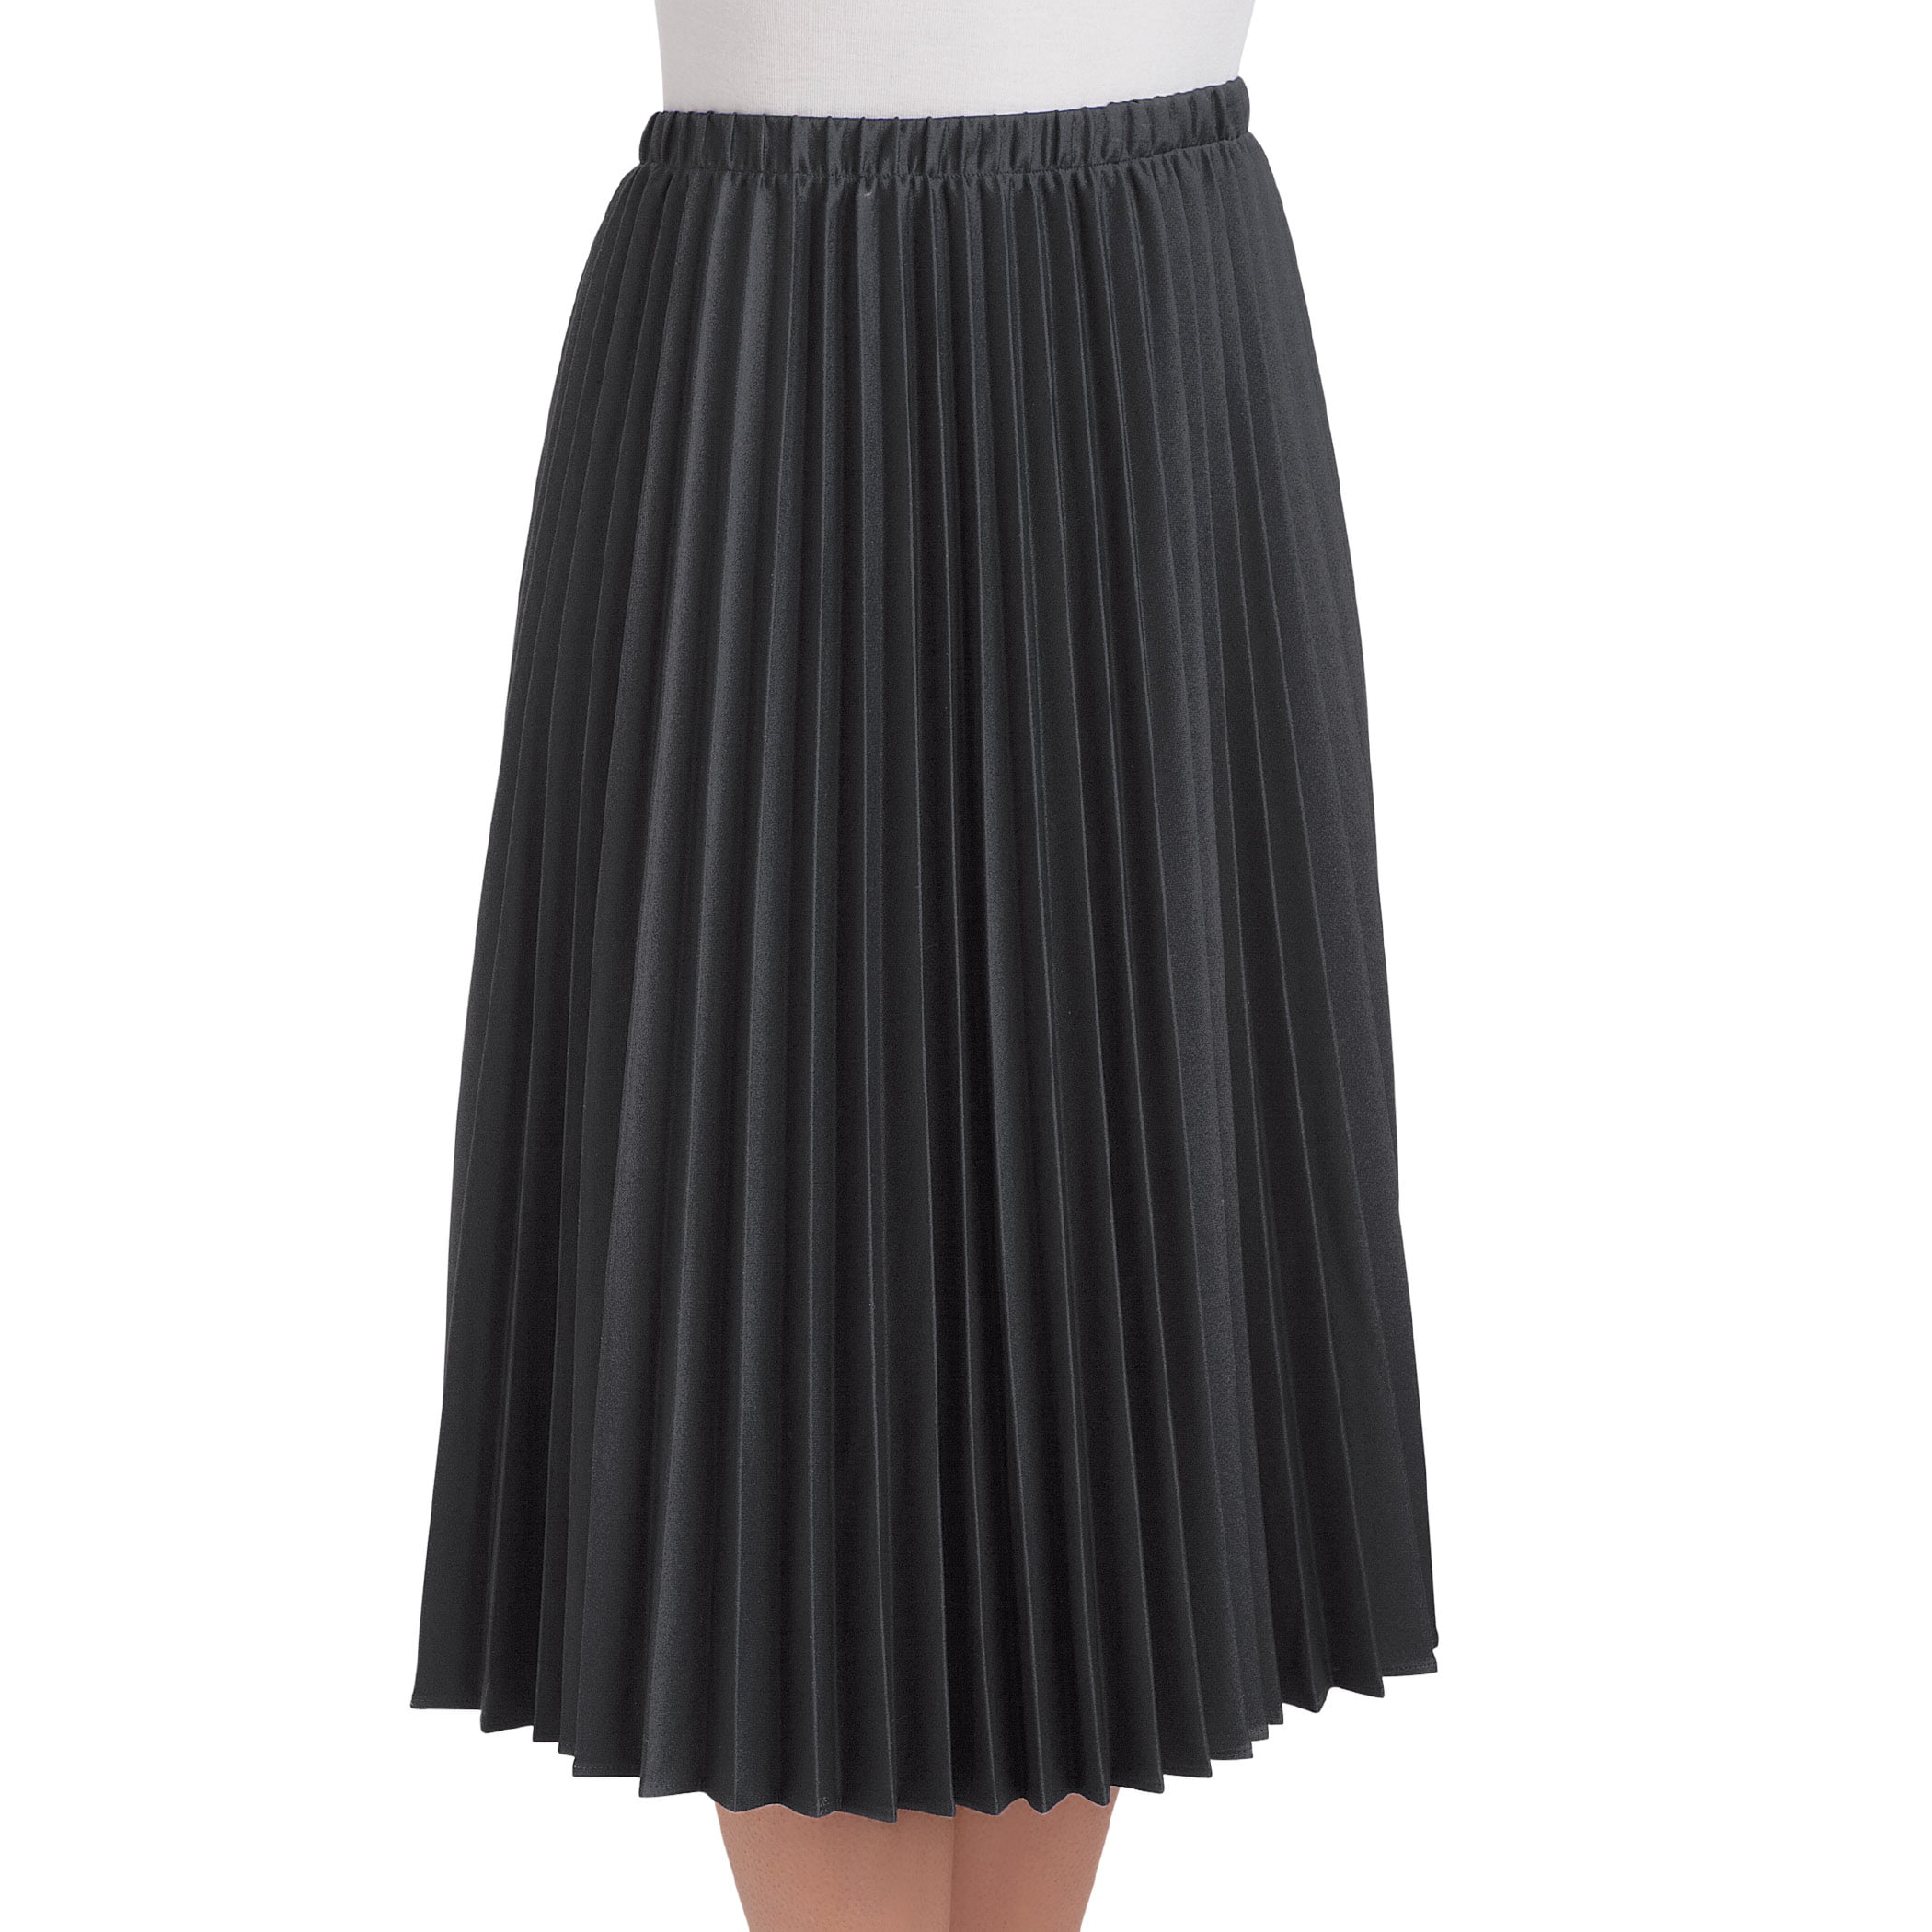 Made Skirt Etc Waistband, Medium with in Mid-Length The Comfortable Classic Women\'s USA Pleated Collections Knit Jersey Black, - Midi Elastic